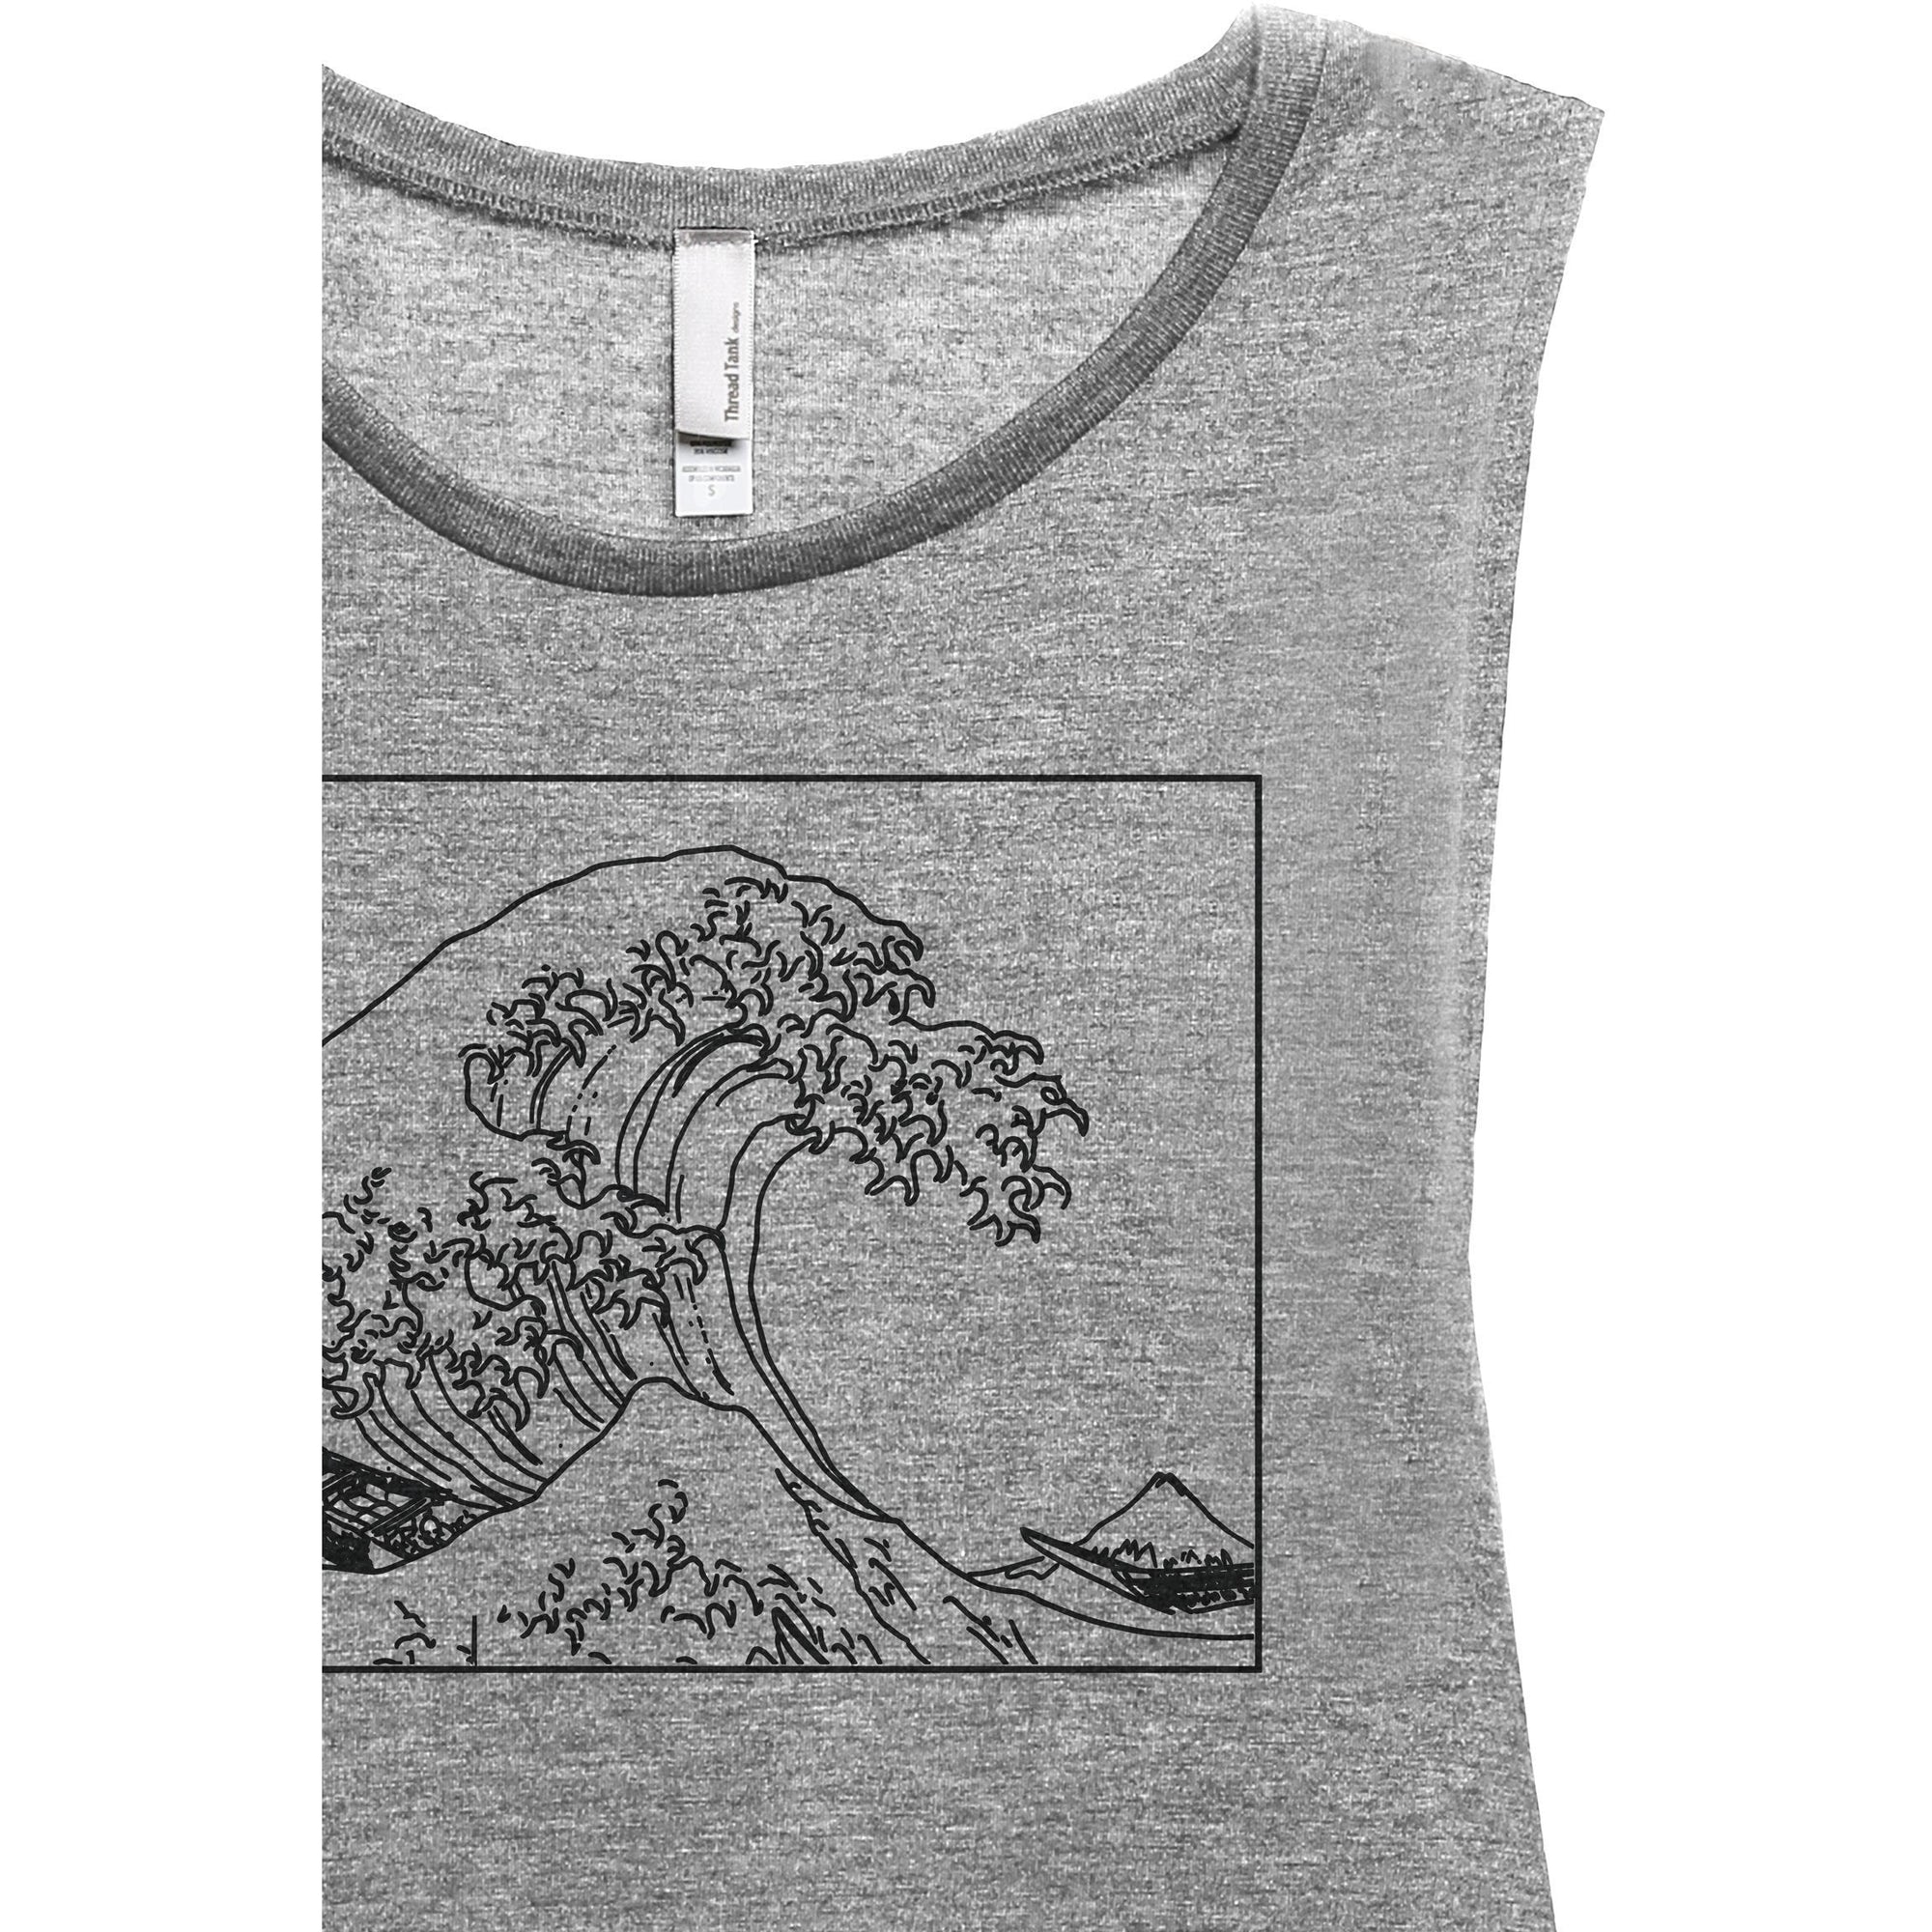 Great Waves Hokusai Women's Relaxed Muscle Tank Tee Heather Grey